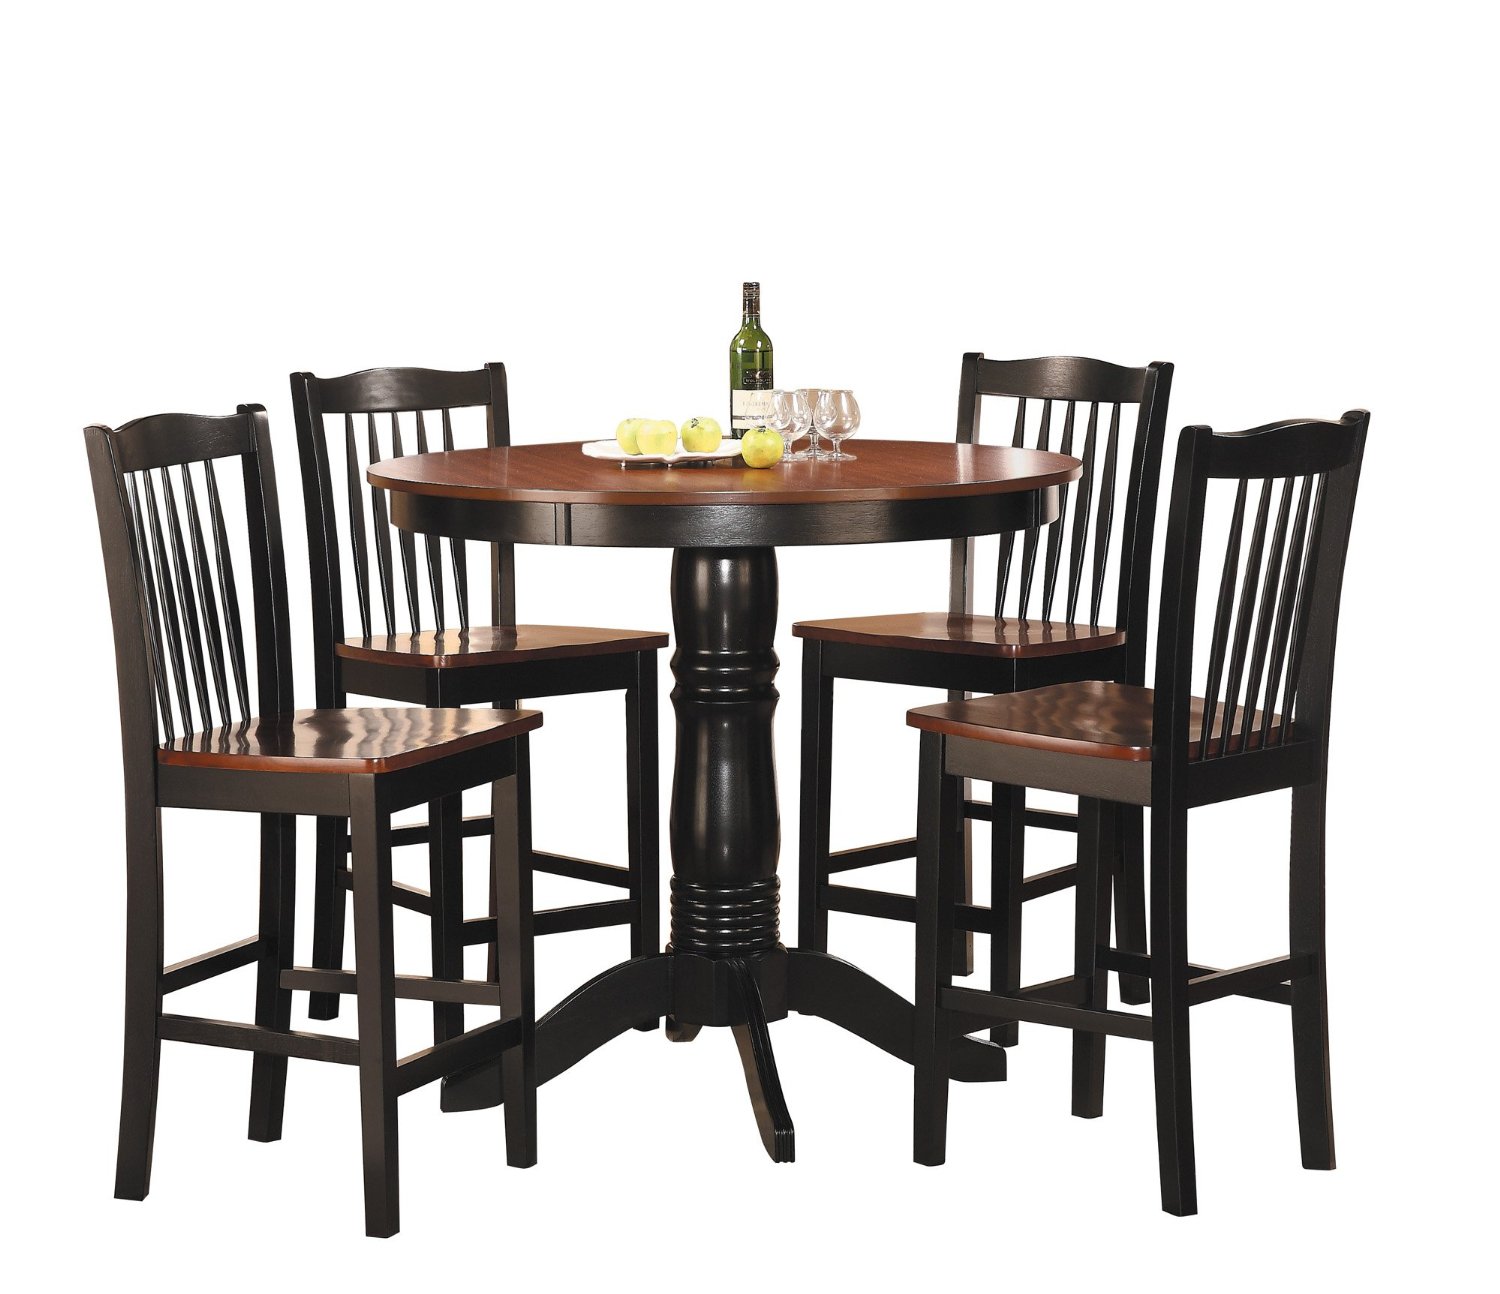 Homelegance 5-Piece Round Counter Height Dining Set - kitchen table set